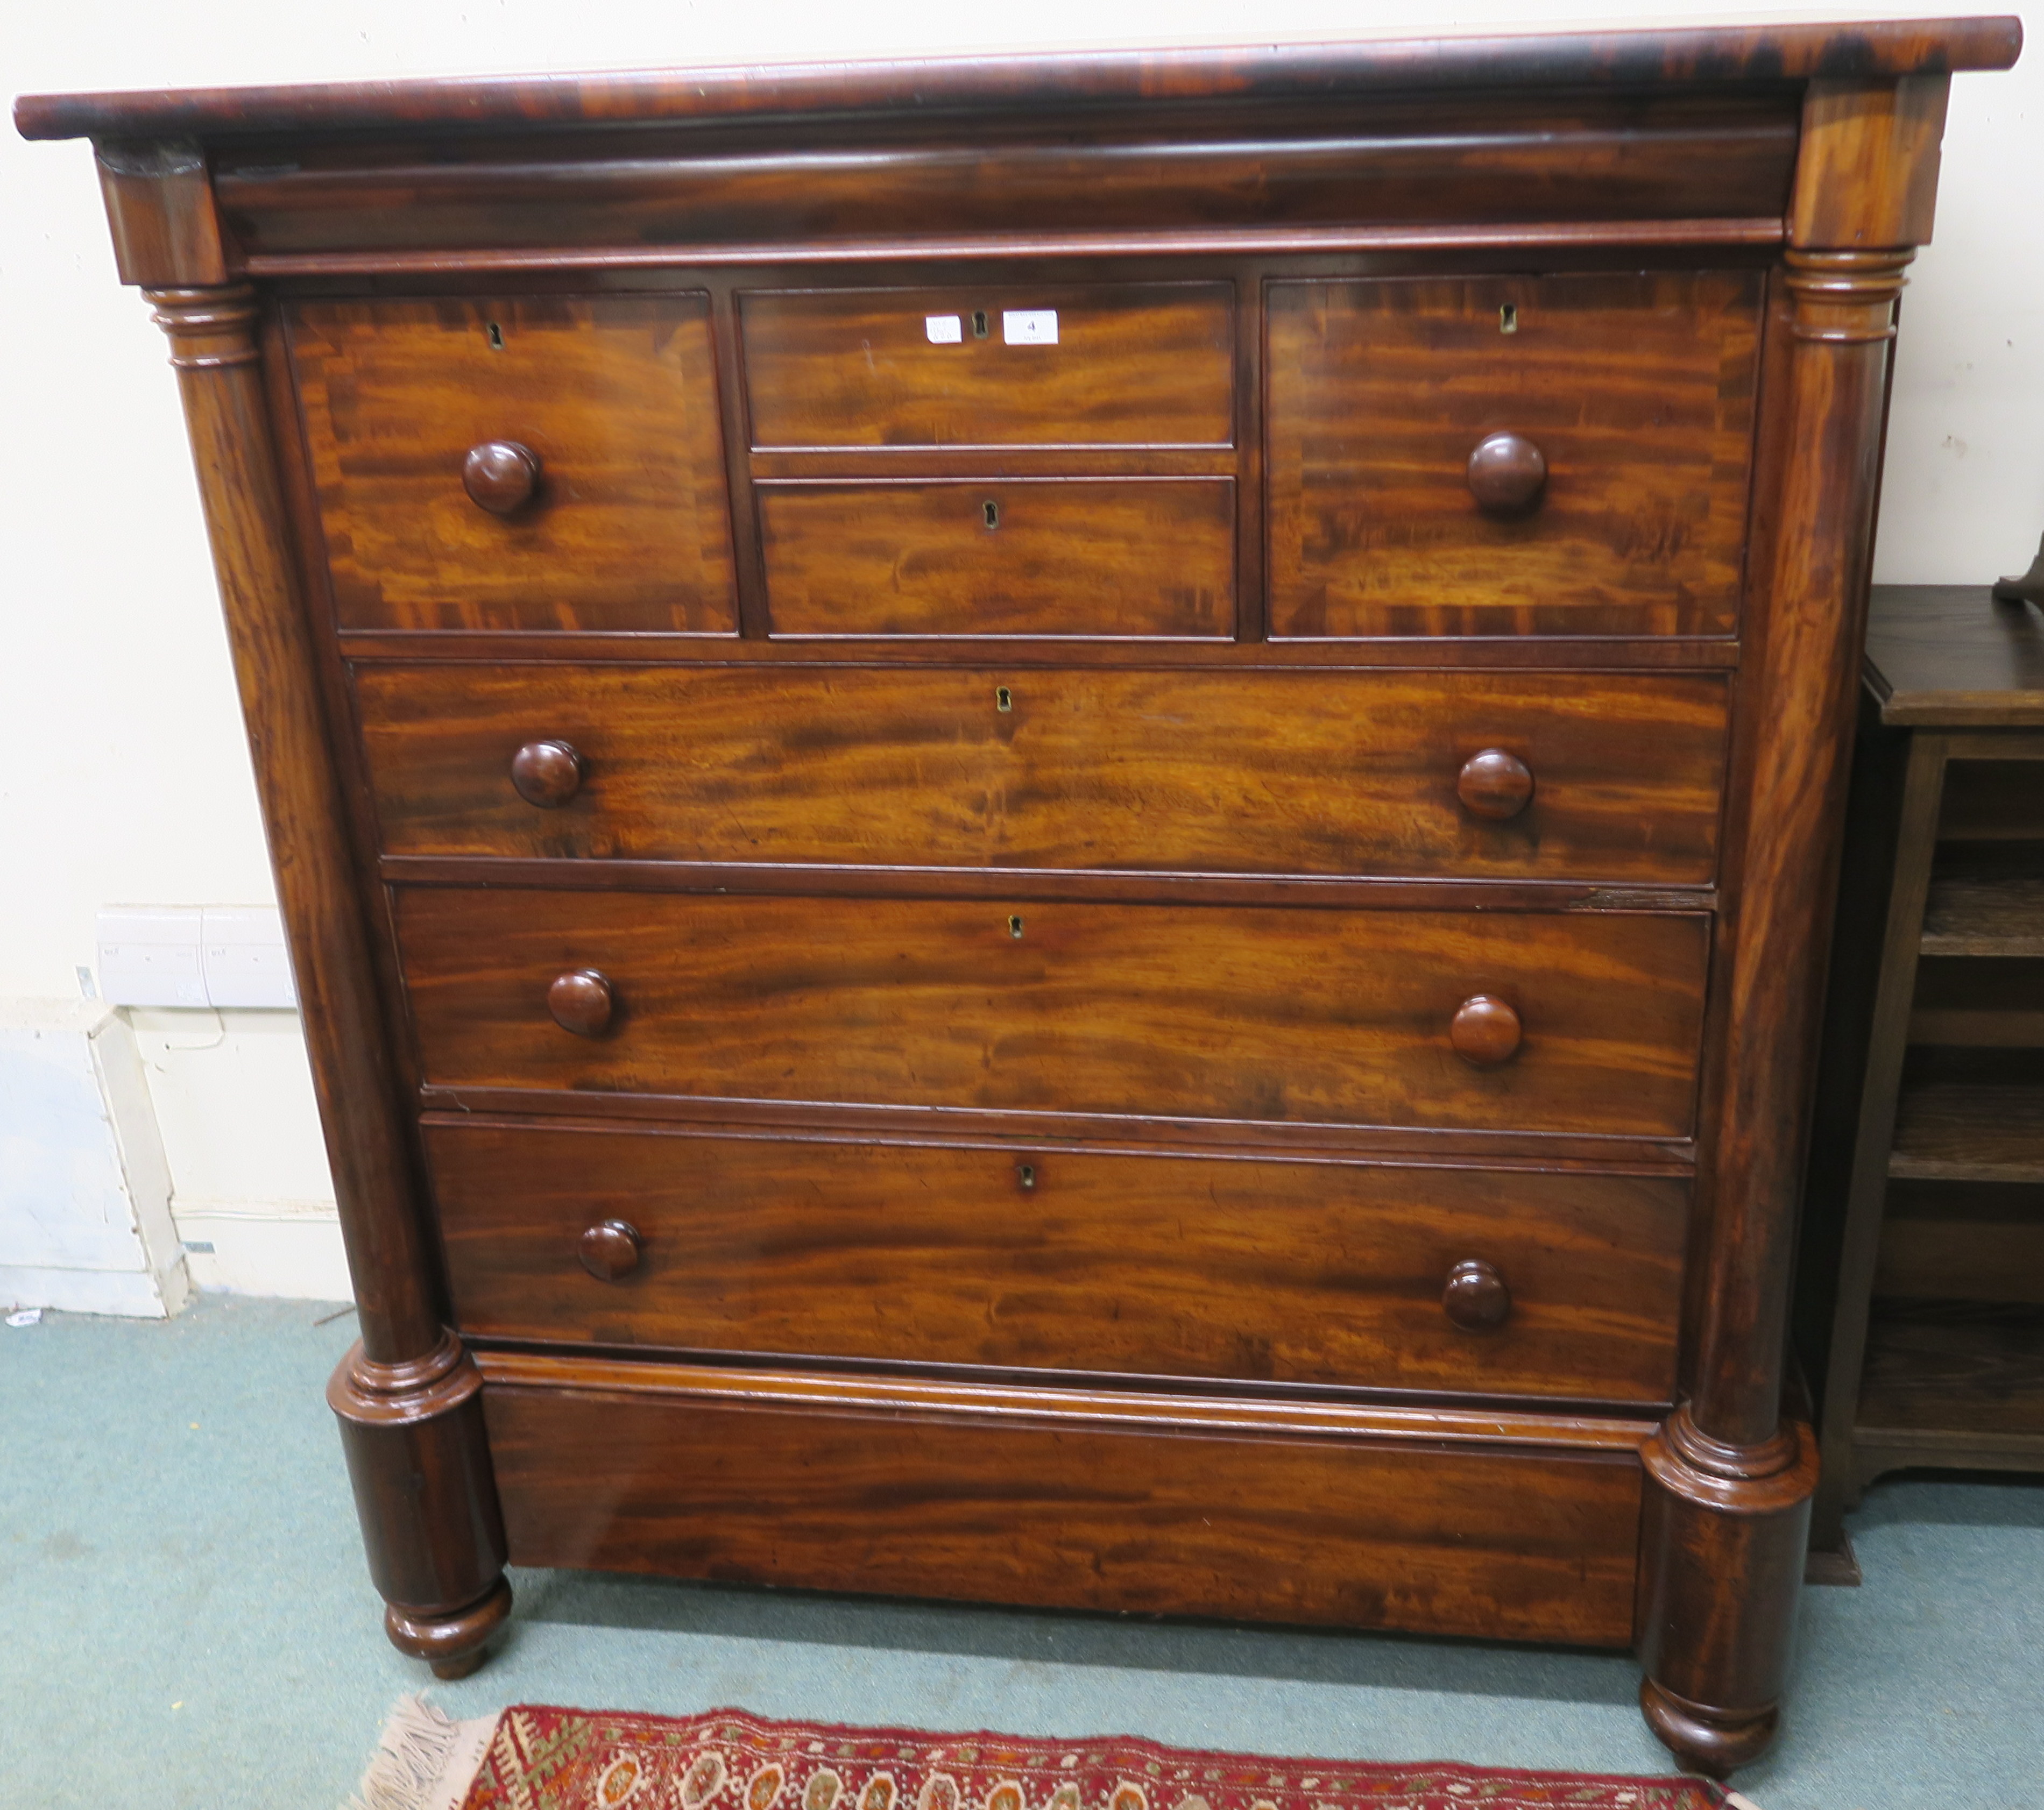 A Victorian mahogany ogee chest with frieze drawer over two small drawers flanked by two drawers